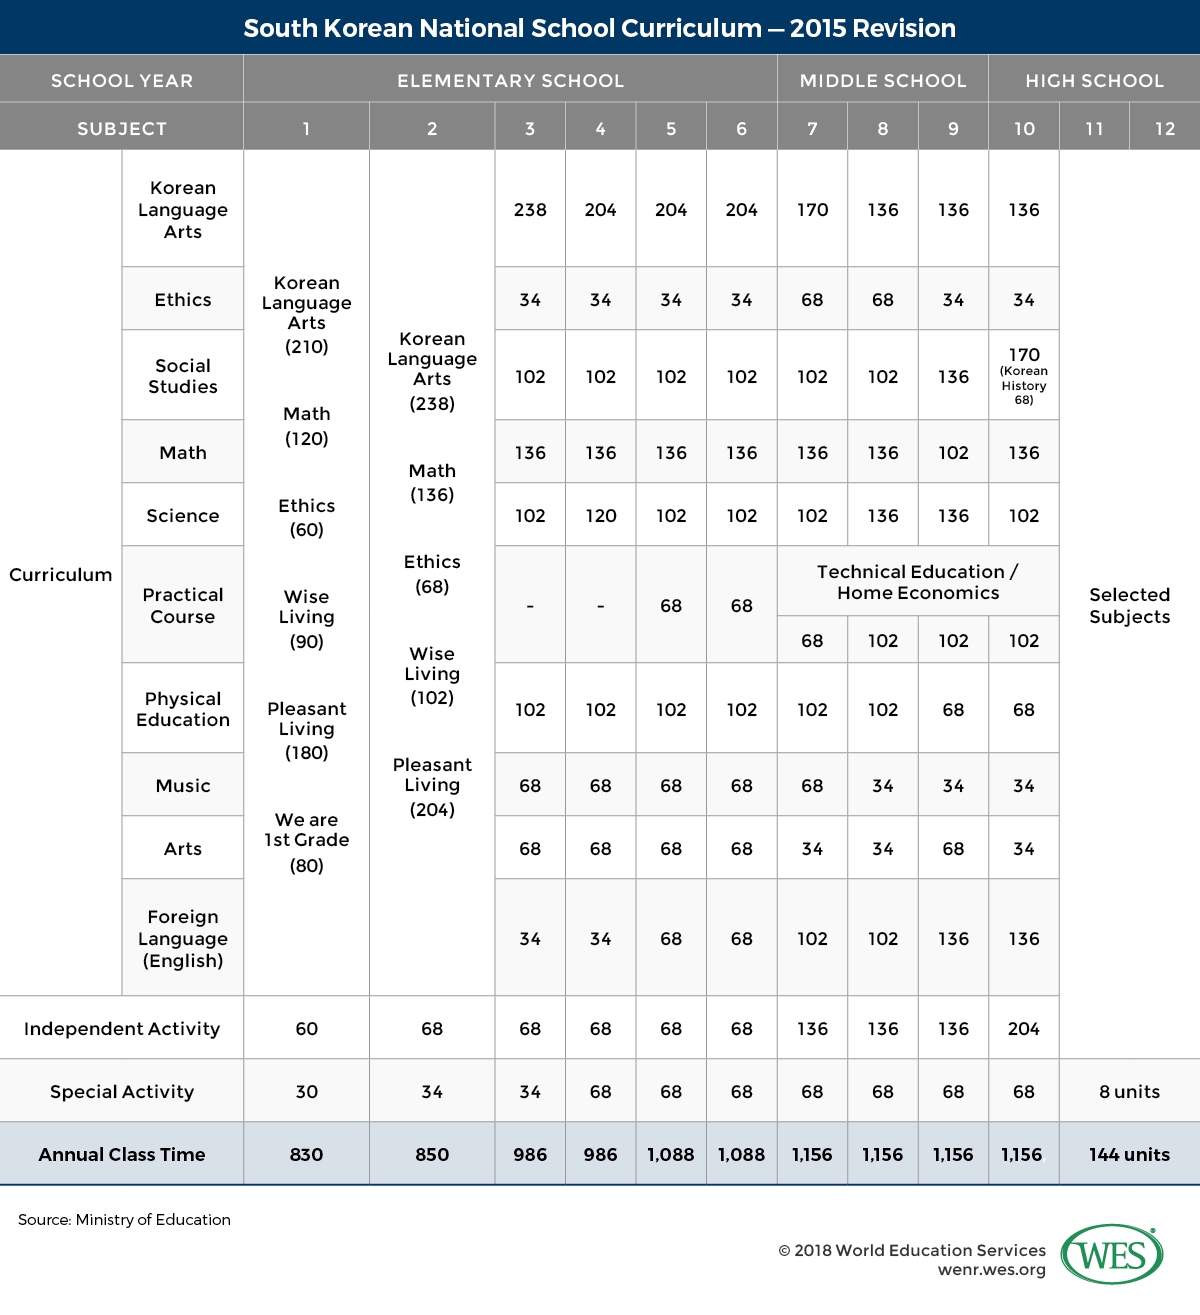 A table showing the 2015 revision of the South Korean National School Curriculum